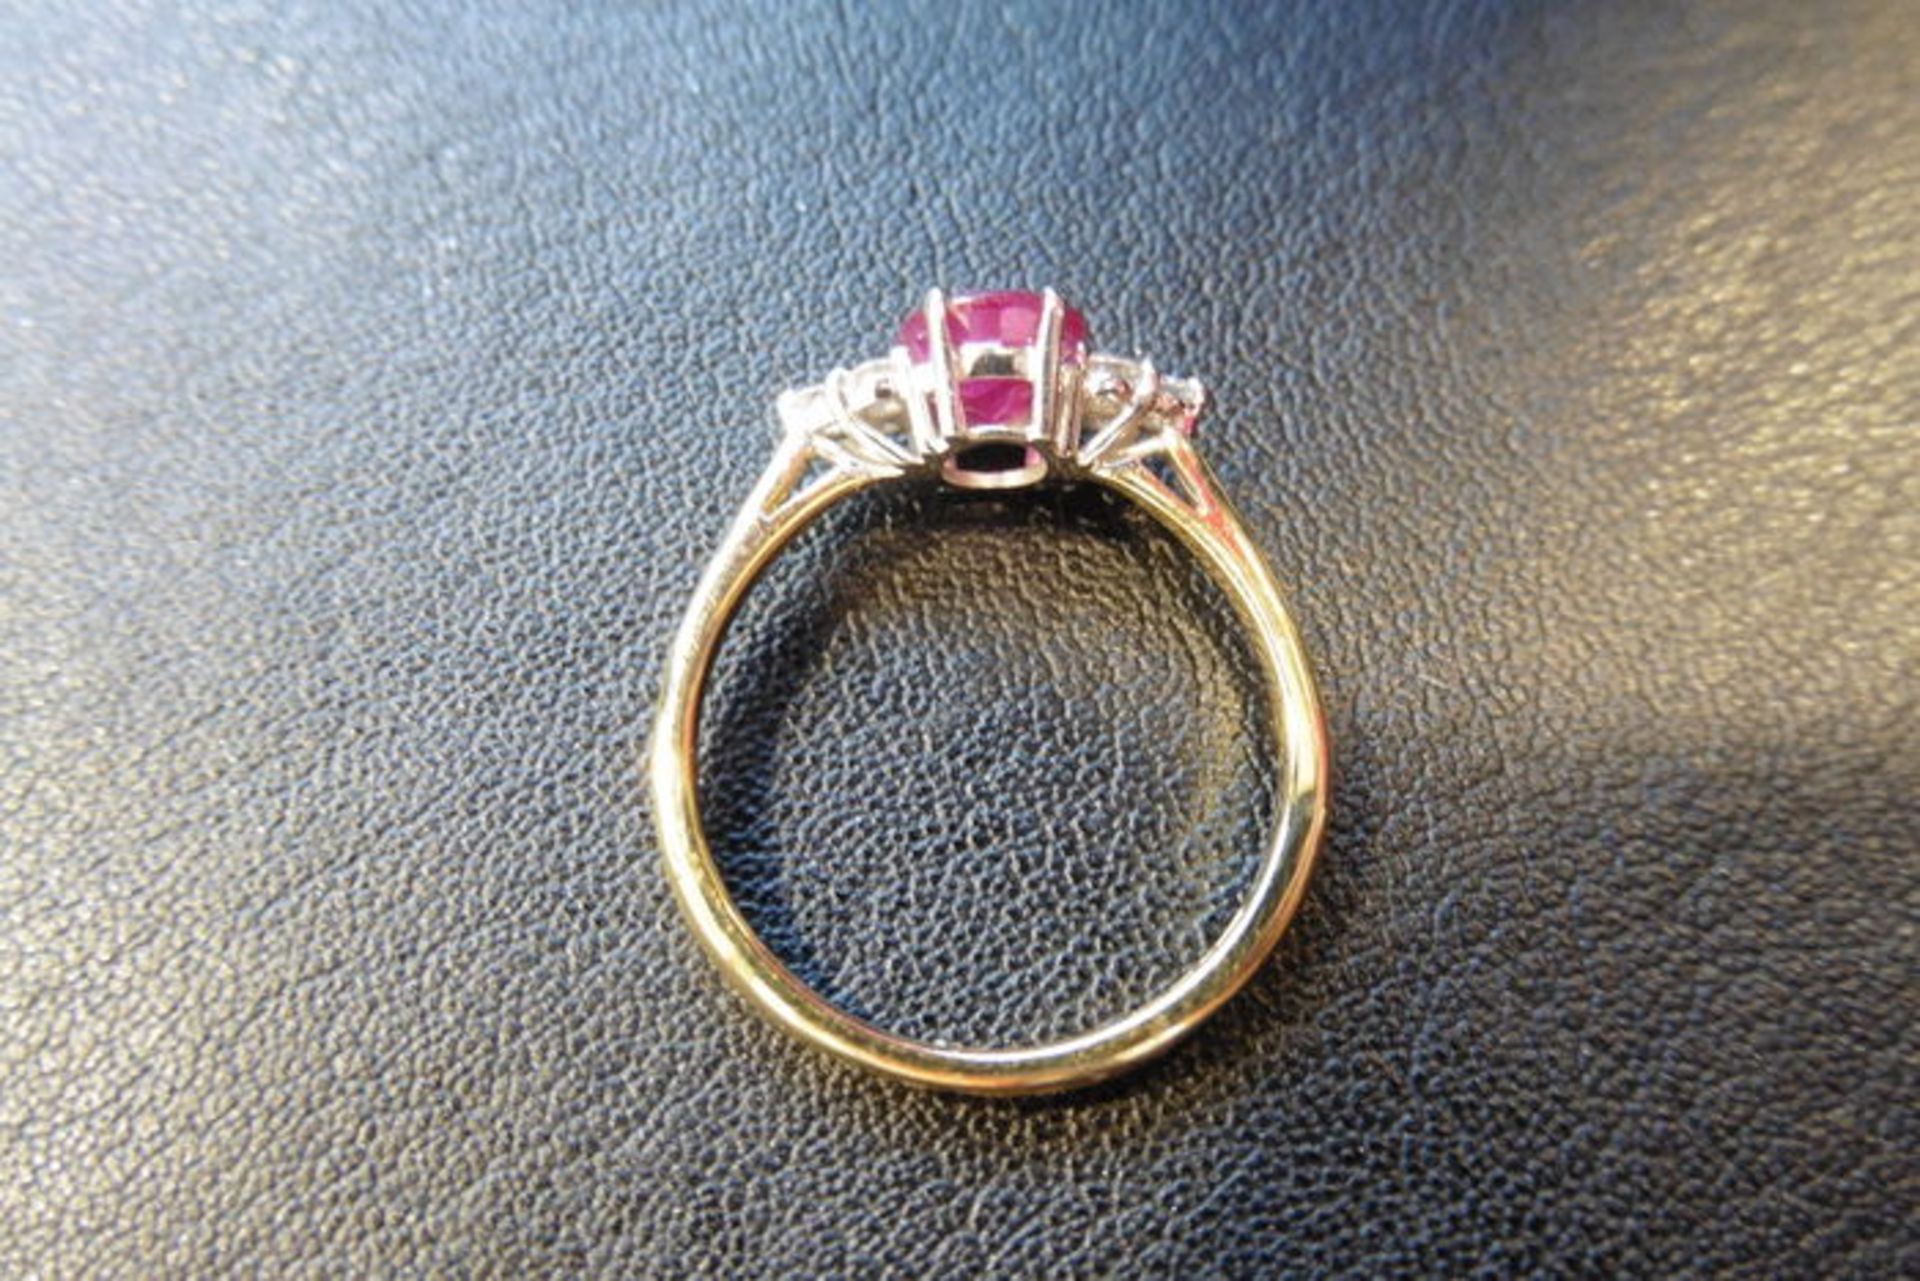 0.80ct ruby and diamond dress ring. 7x 5mm oval cutr uby (treated) with 3 small diamonds set - Image 2 of 3